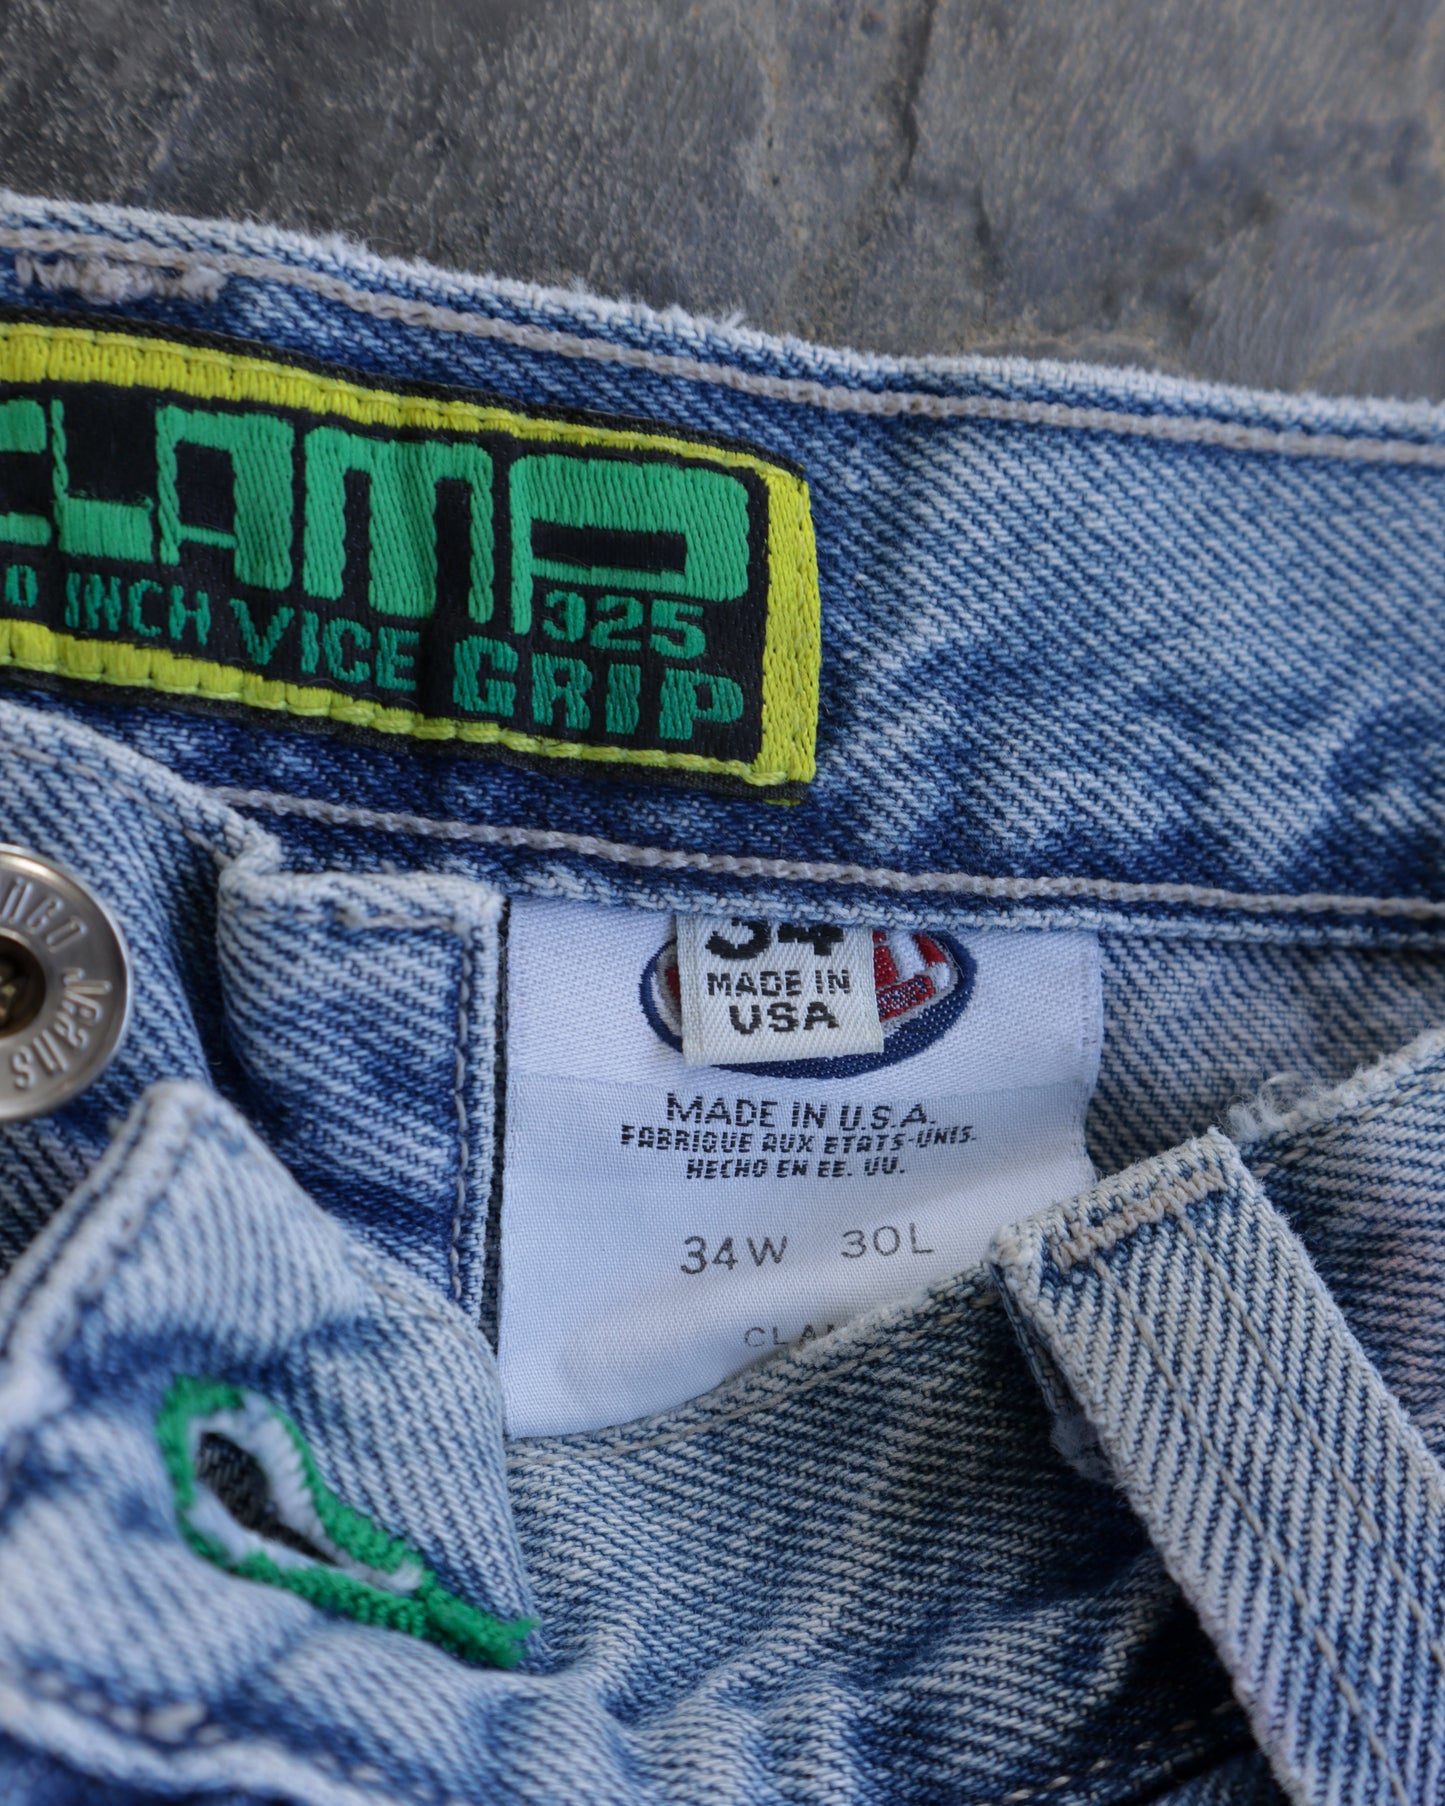 90s JNCO Clamp Chopped Jeans - 34